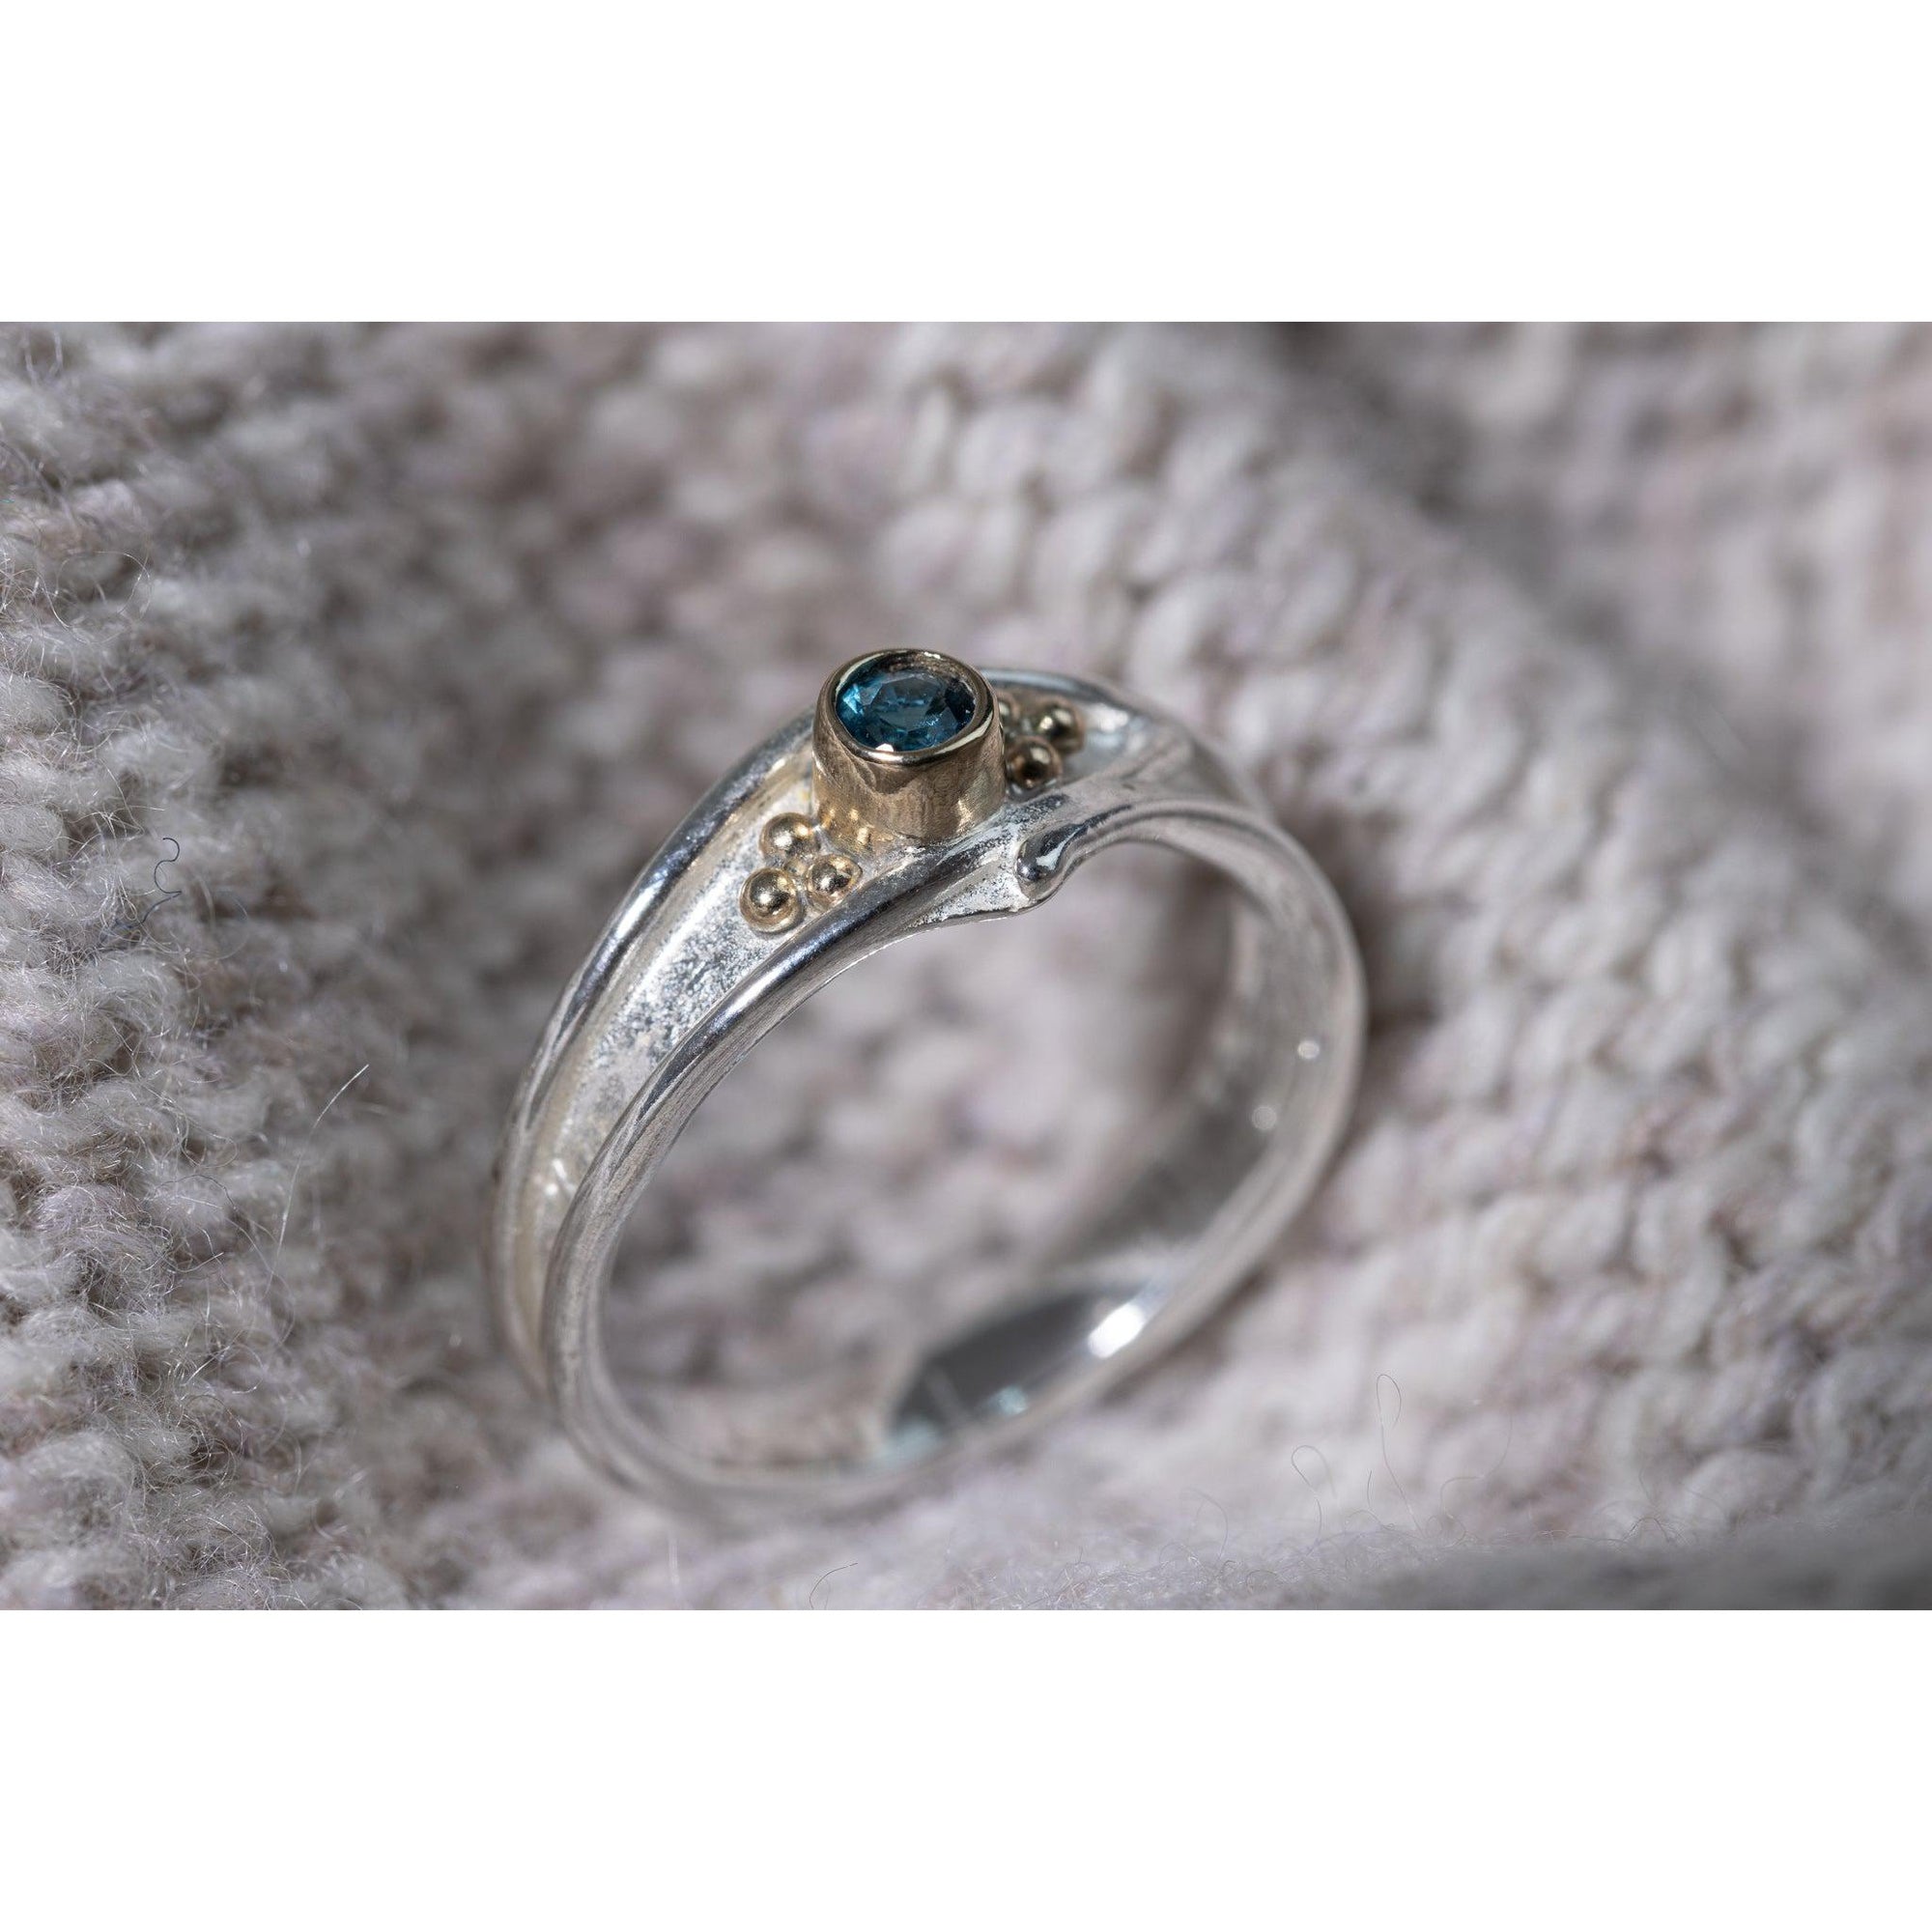 'LG63 - Silver Ring with 9ct Gold 3mm London Blue Topaz Ring ' by Les Grimshaw, available at Padstow Gallery, Cornwall